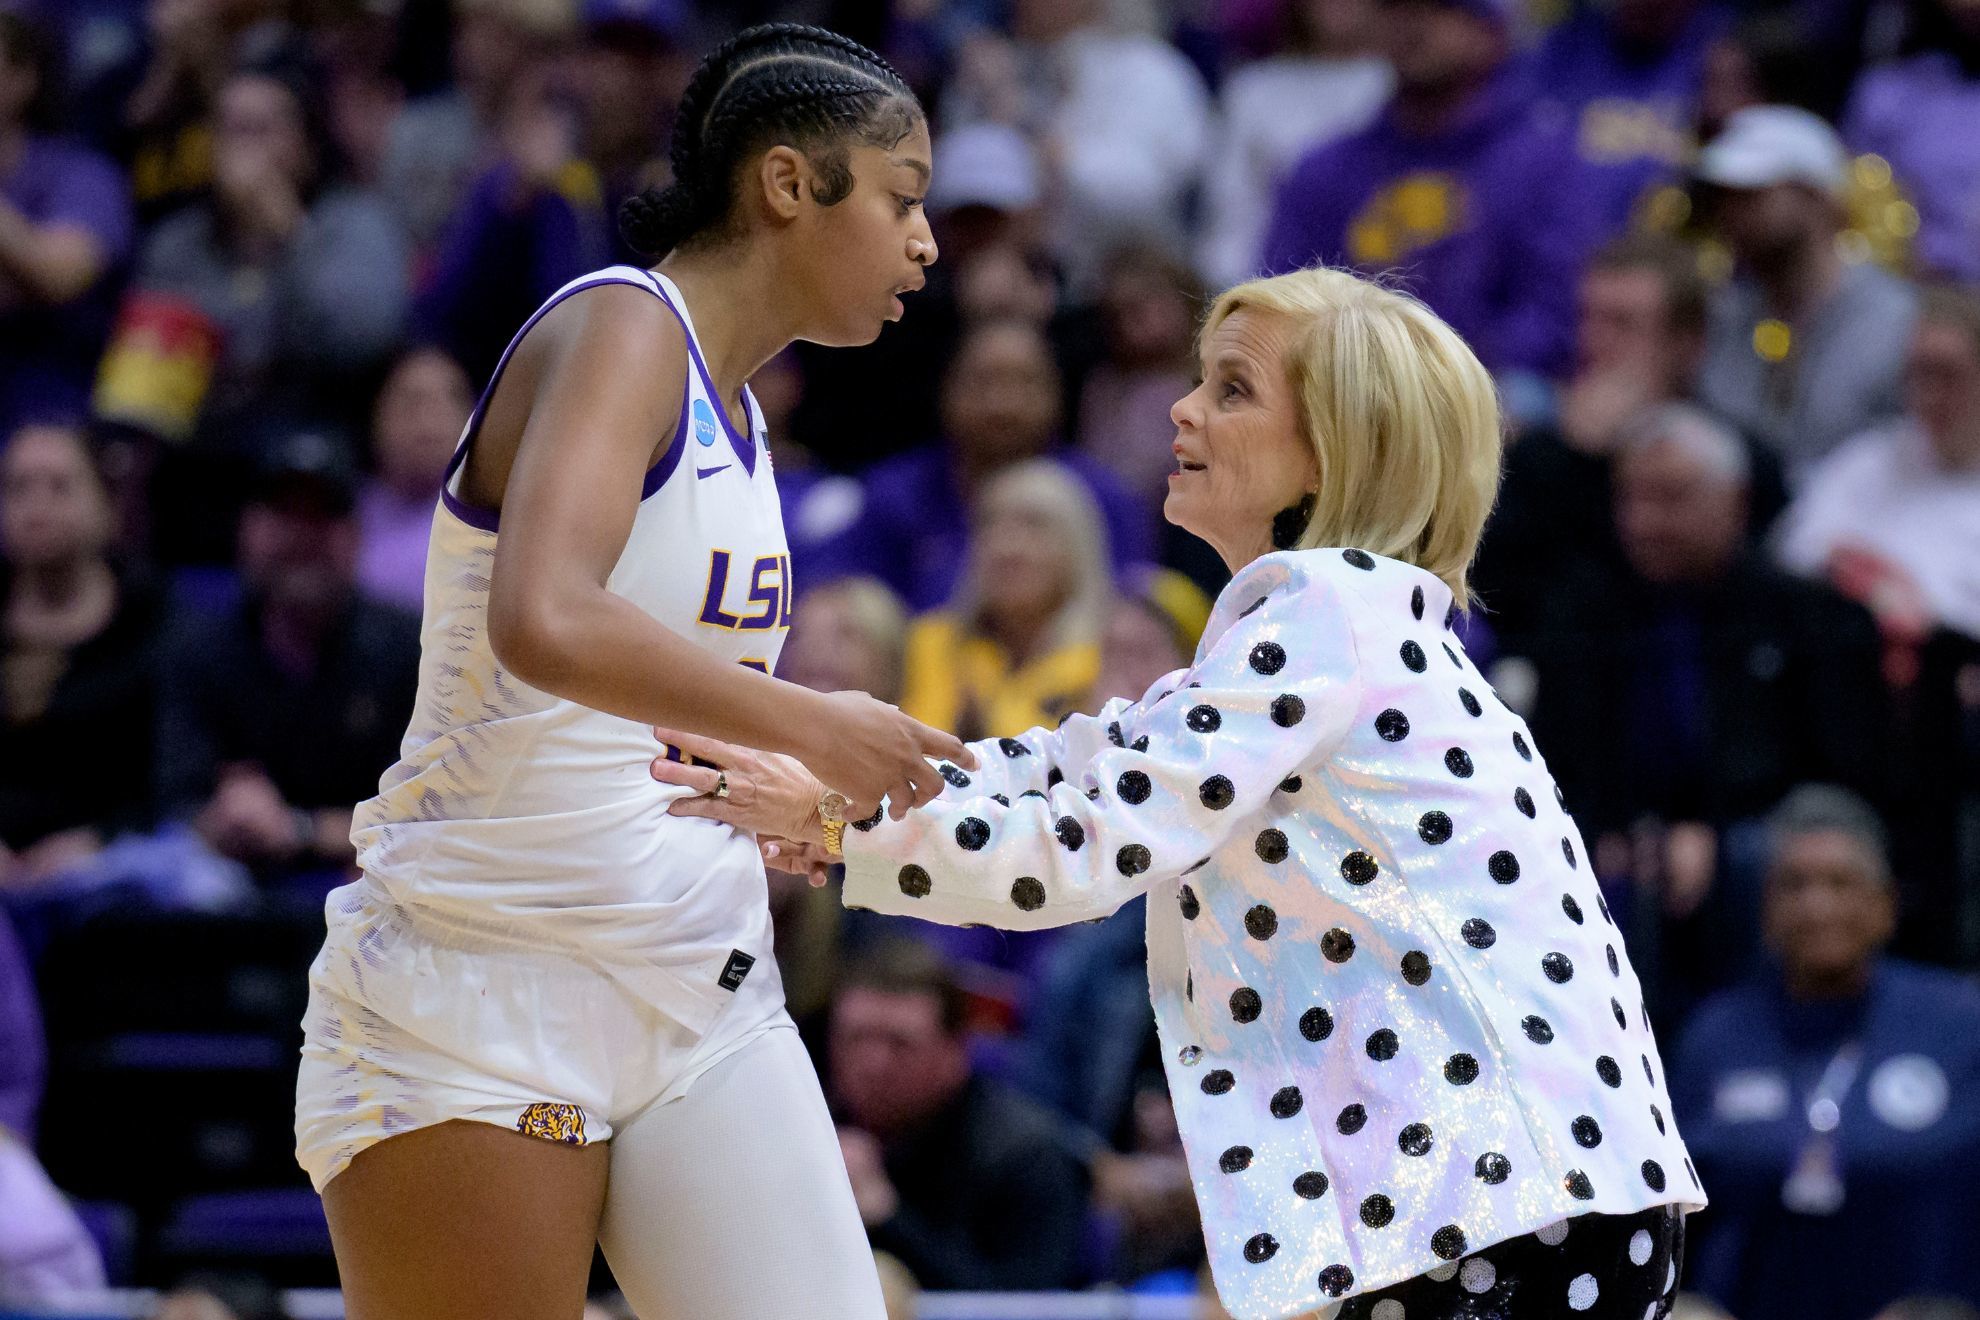 Angel Reese vs. LSU head coach Kim Mulkey: who is at fault for the ongoing drama?